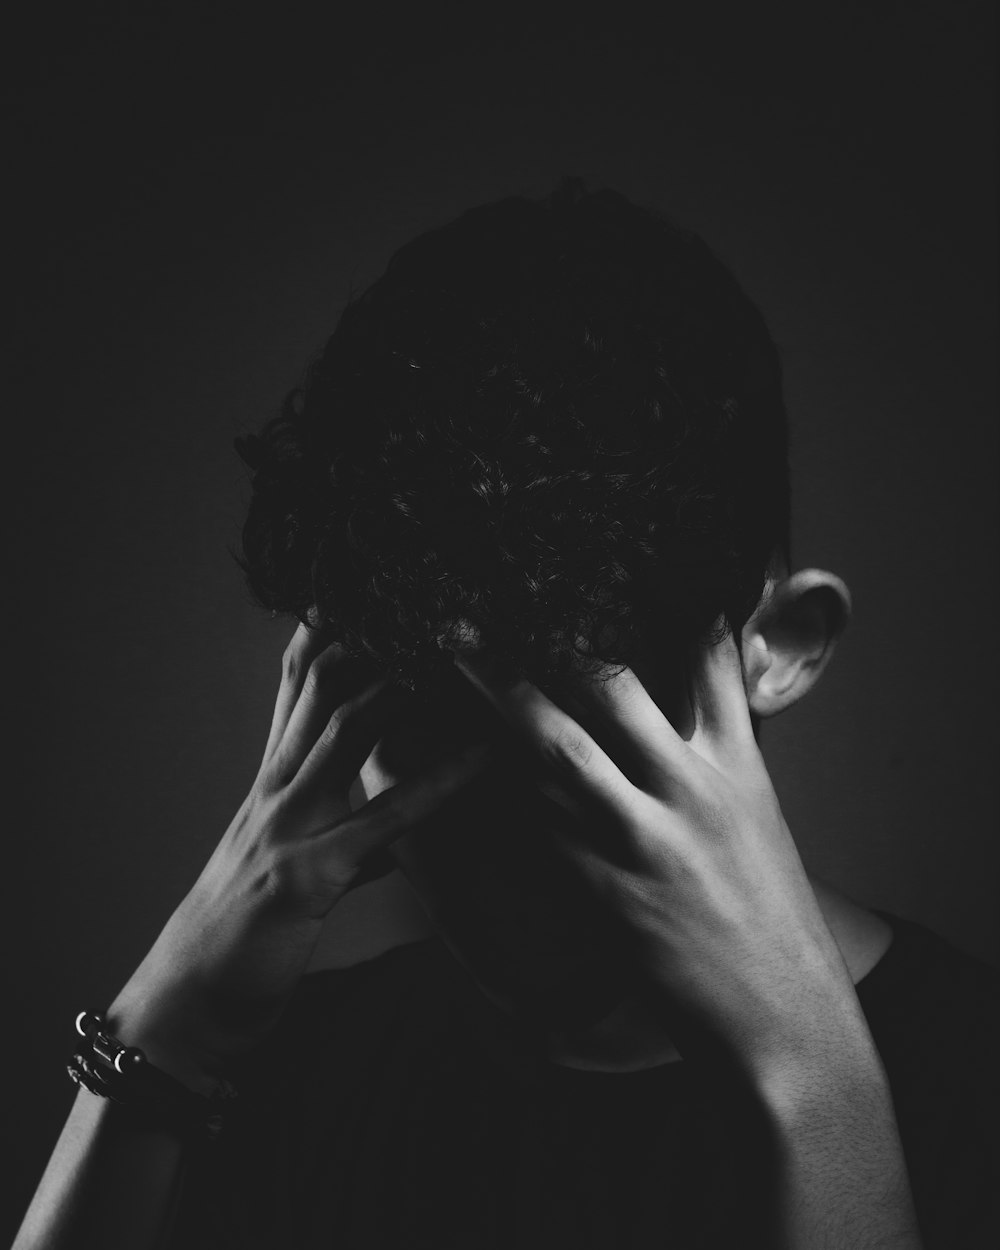 grayscale photo of man covering his face with his hand